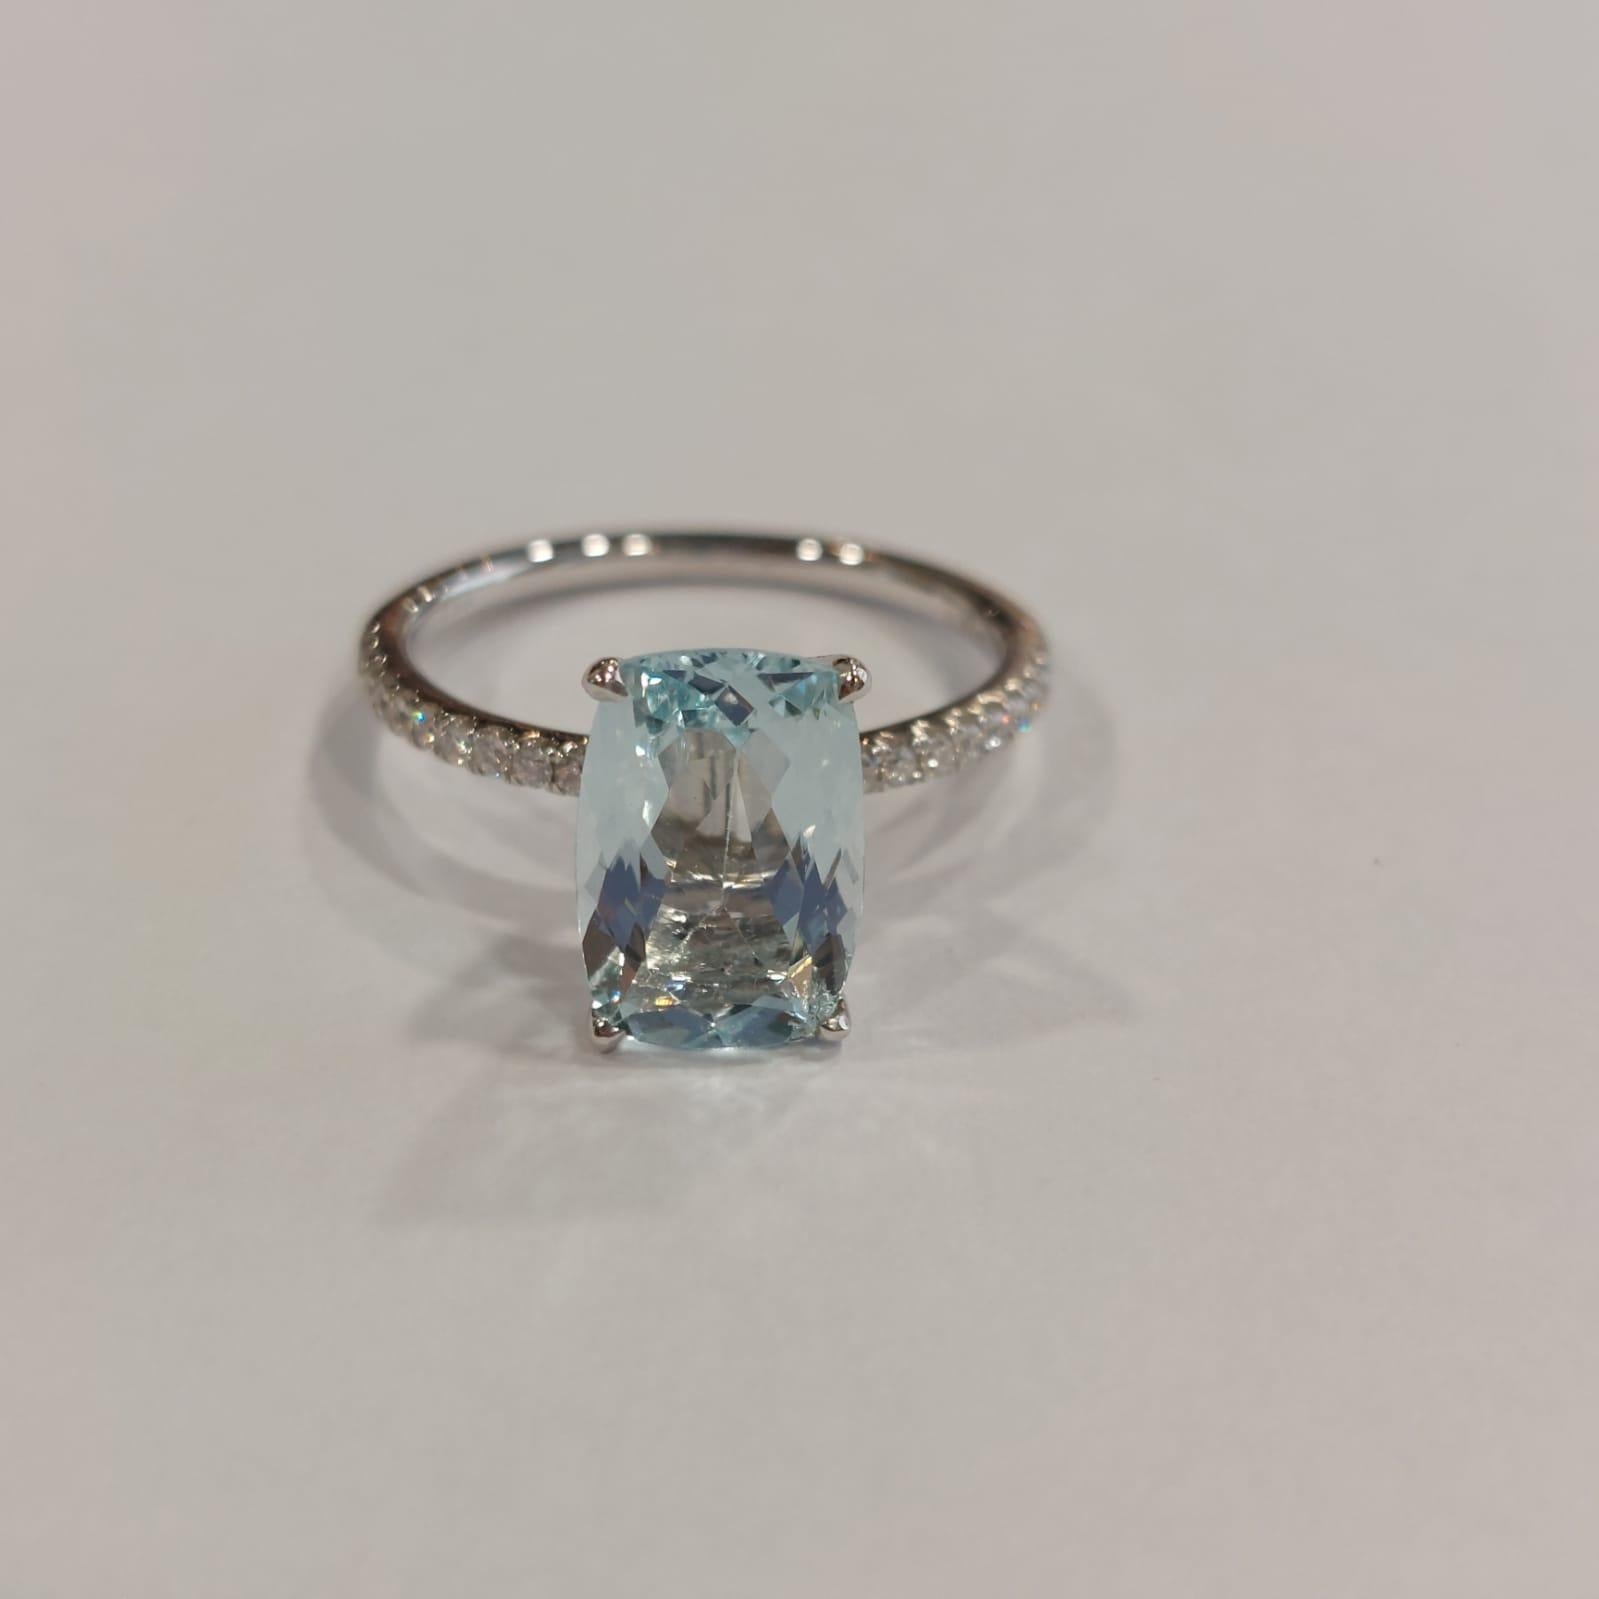 Gilin 18k White Gold Diamond Ring with Aquamarine For Sale 2